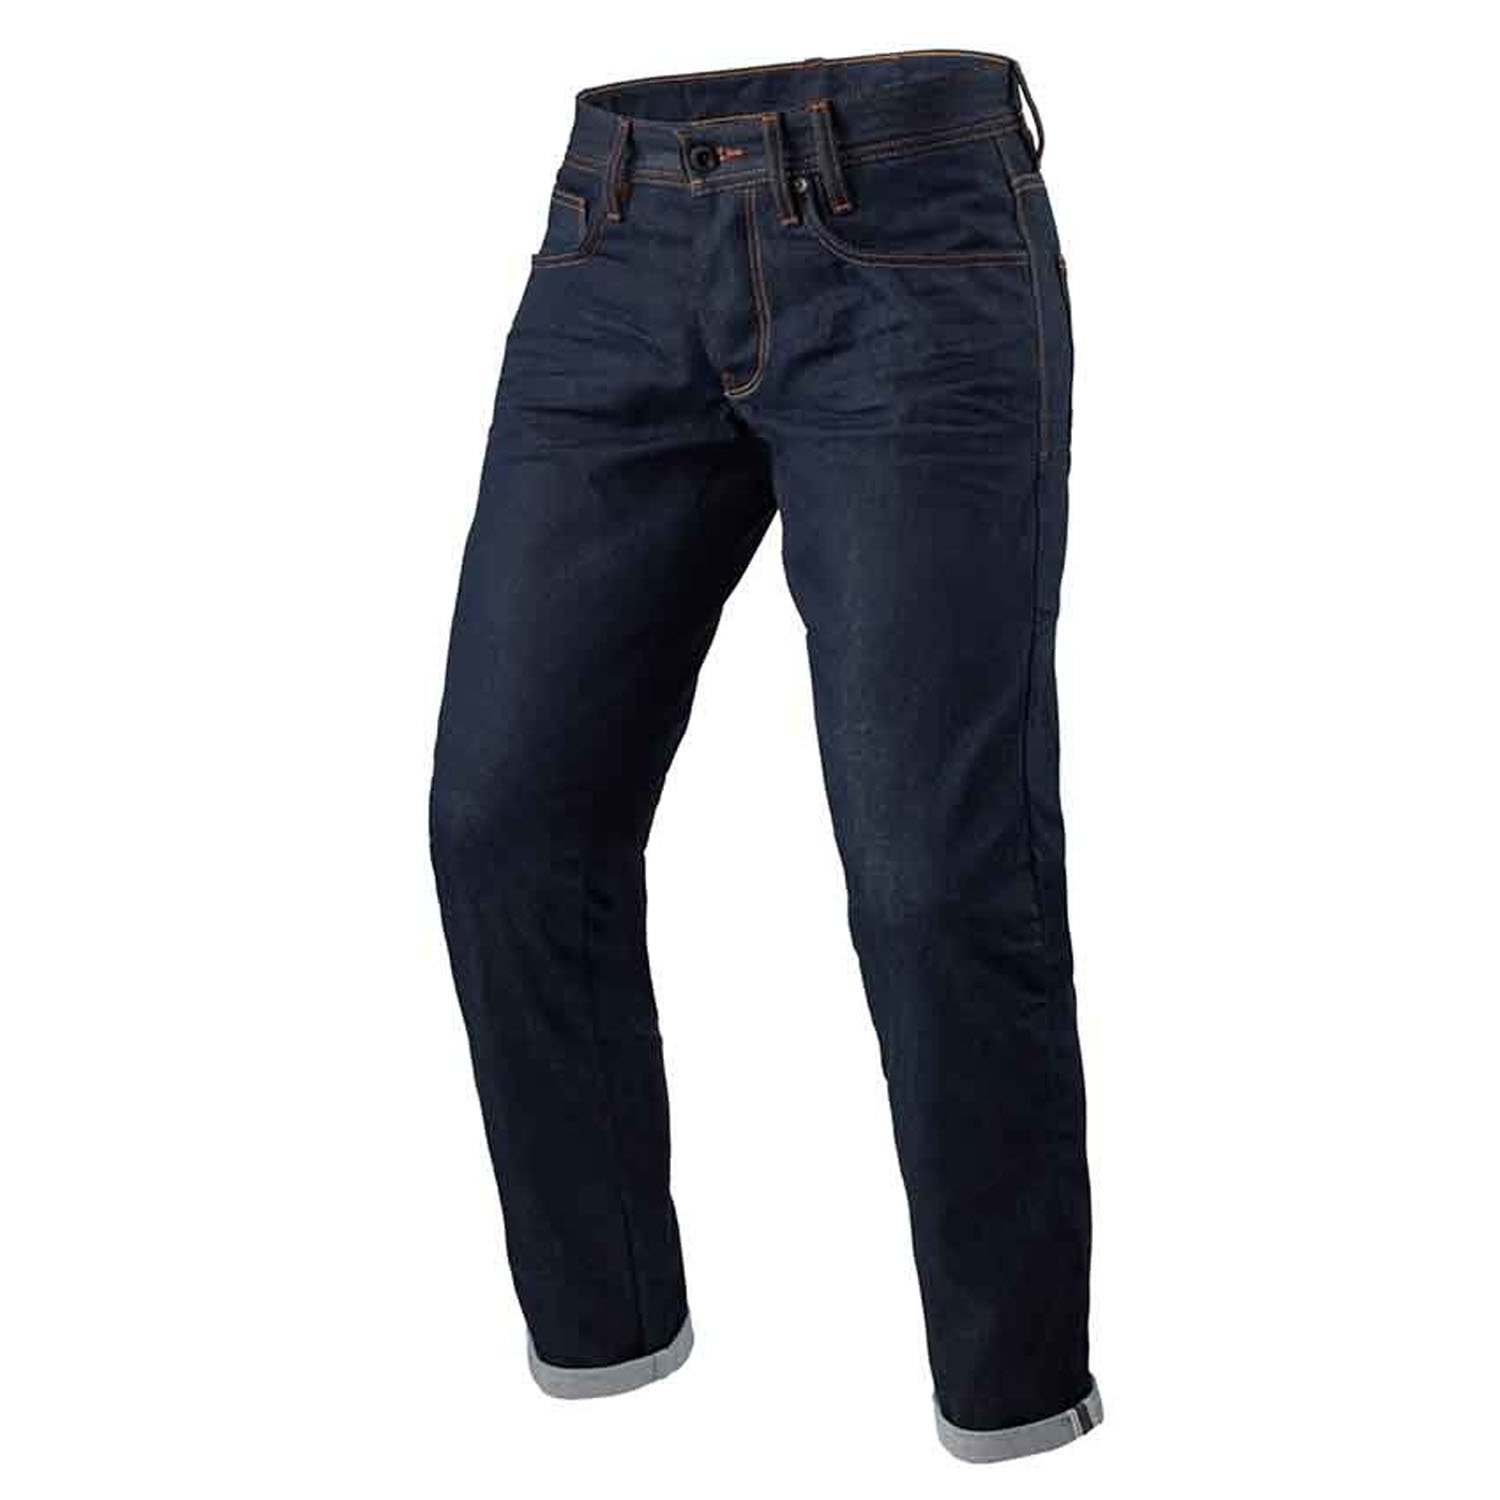 Image of REV'IT! Jeans Lewis Selvedge TF Dark Blue L36 Motorcycle Pants Size L36/W34 ID 8700001358132